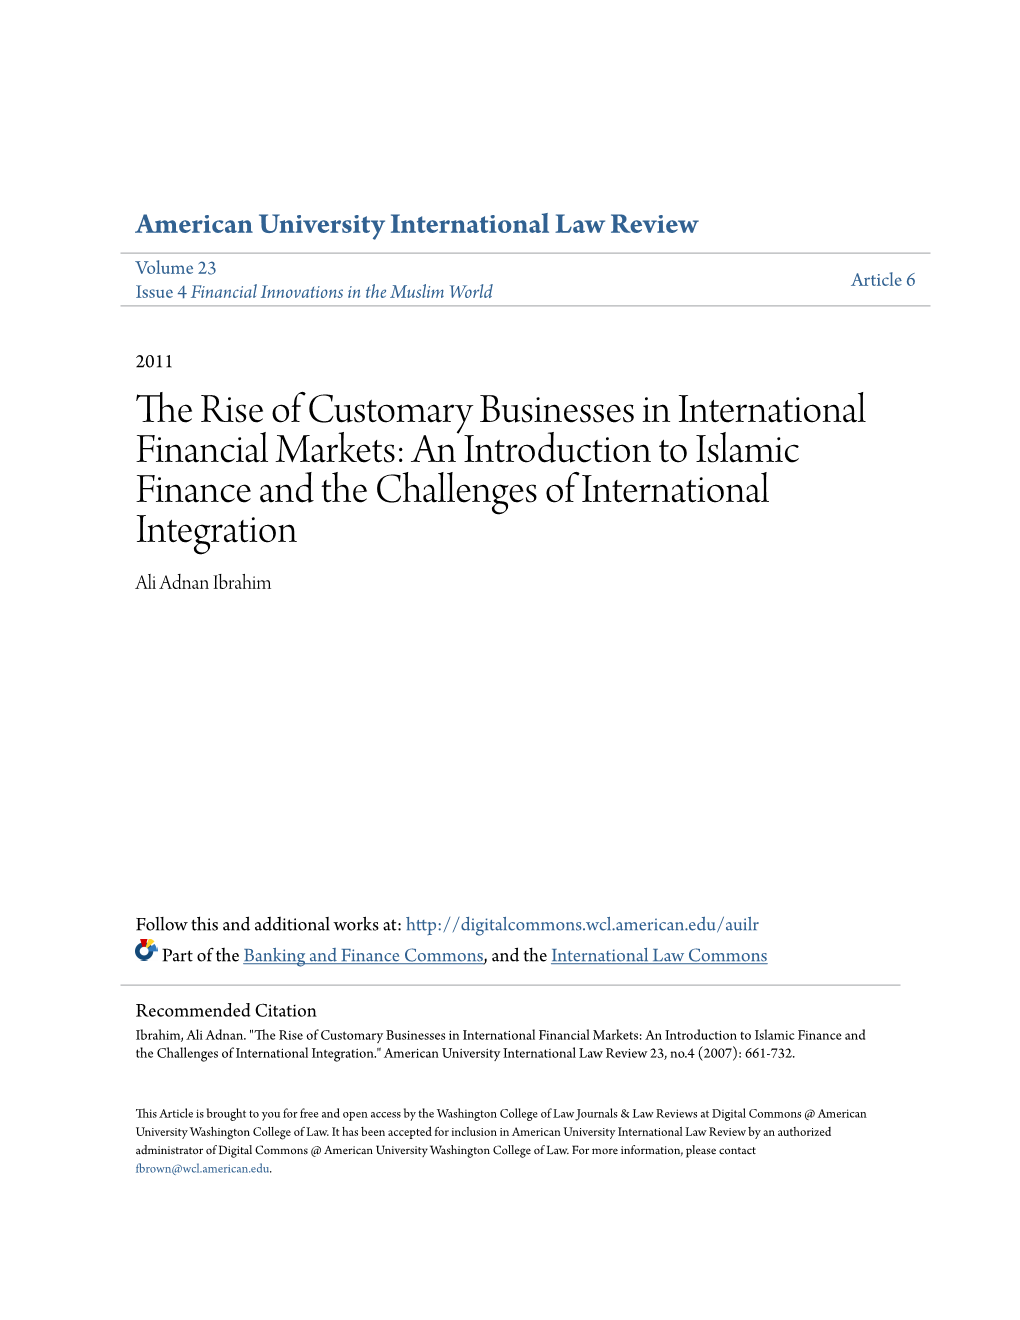 The Rise of Customary Businesses in International Financial Markets: An